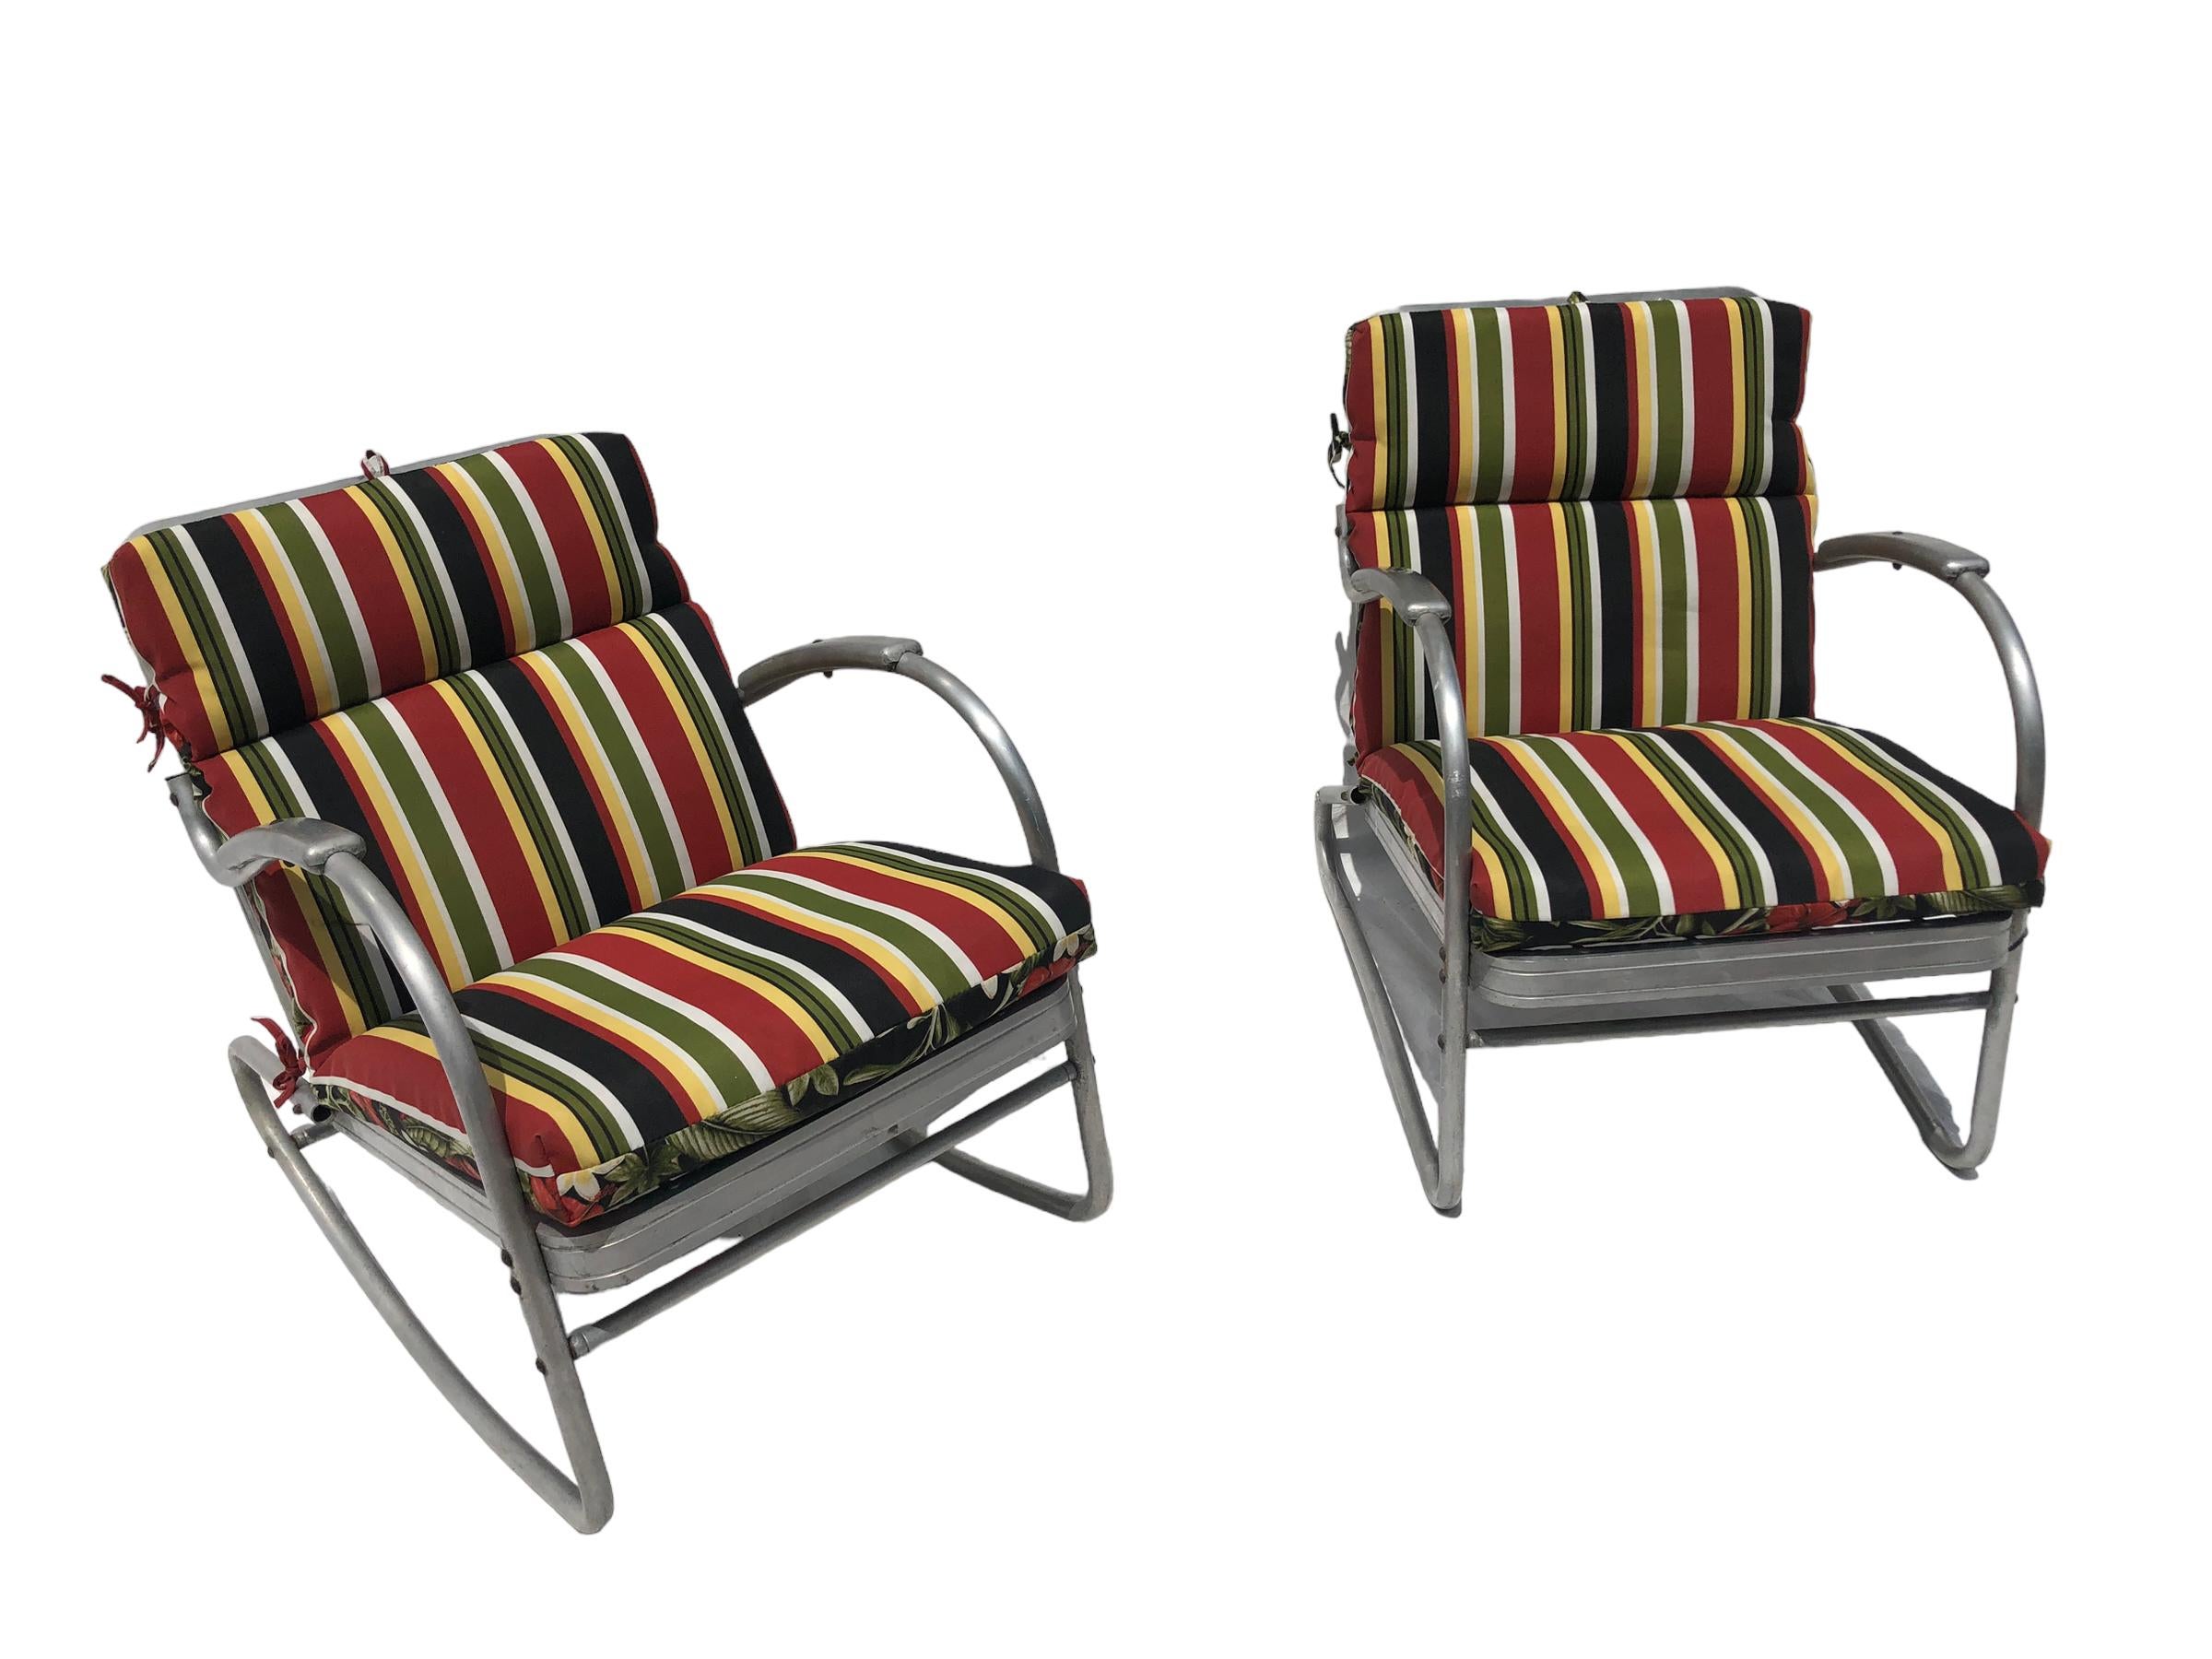 Pair of Vintage Aluminum Outdoor Patio Chairs. One is a rocker and the other is a regular chair. The cushions are off the shelf and could use a custom made cushions. Signed on the frame “The Bunting Co. Philadelphia Penn”
Seat 17”h 19”w 22”d